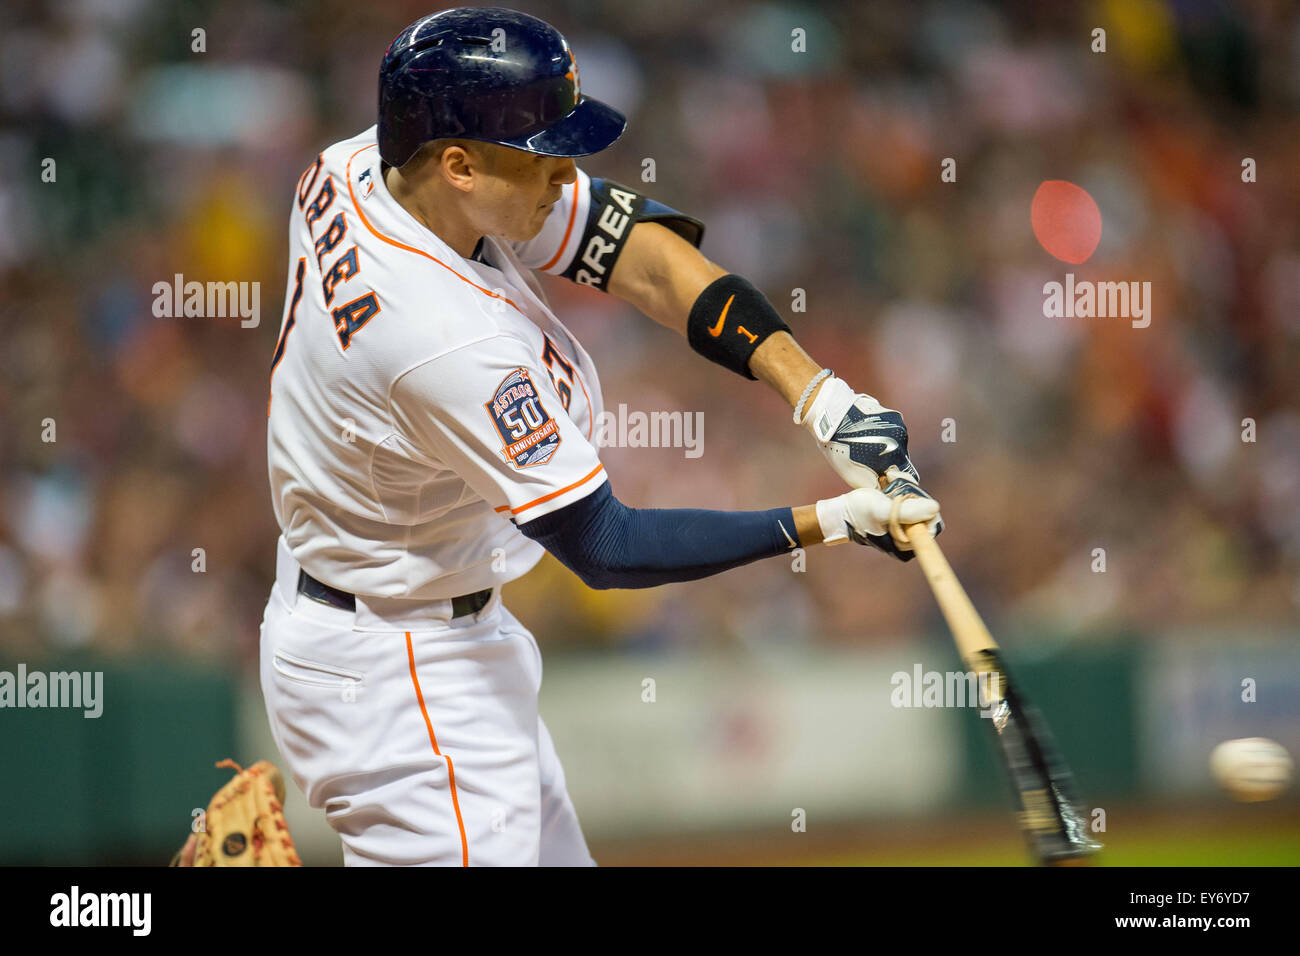 Houston, TX, USA. 22nd July, 2015. Houston Astros shortstop Carlos Correa (1) hits a single during the 5th inning of a Major League Baseball game between the Houston Astros and the Boston Red Sox at Minute Maid Park in Houston, TX. Trask Smith/CSM/Alamy Live News Stock Photo